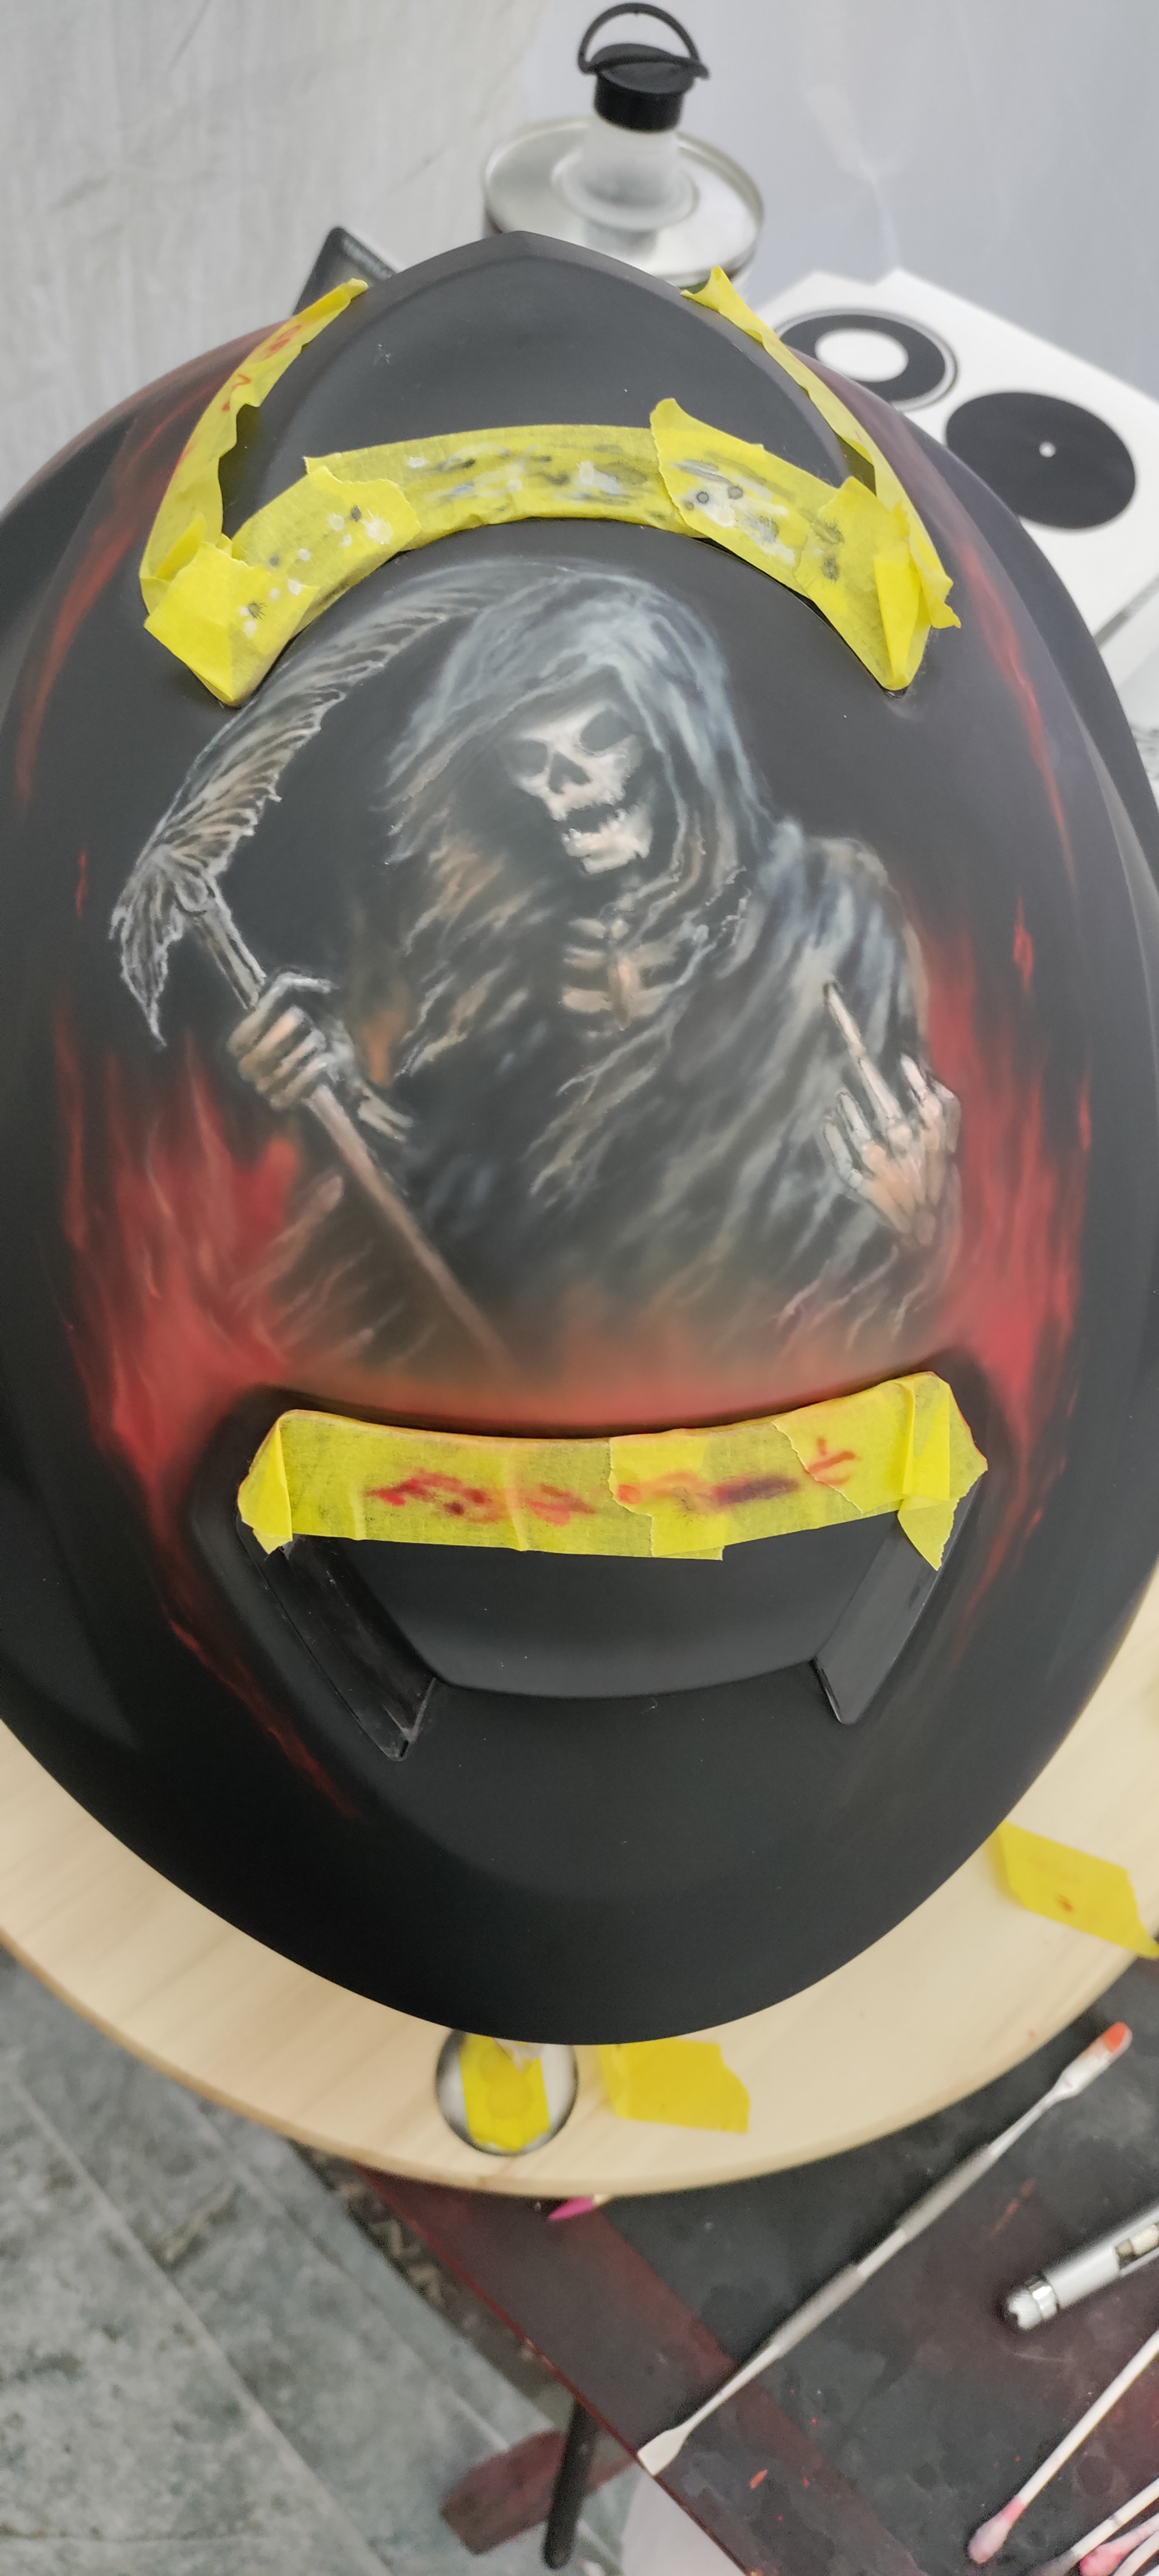 Grim reaper was looking too pale, so I added flames... 